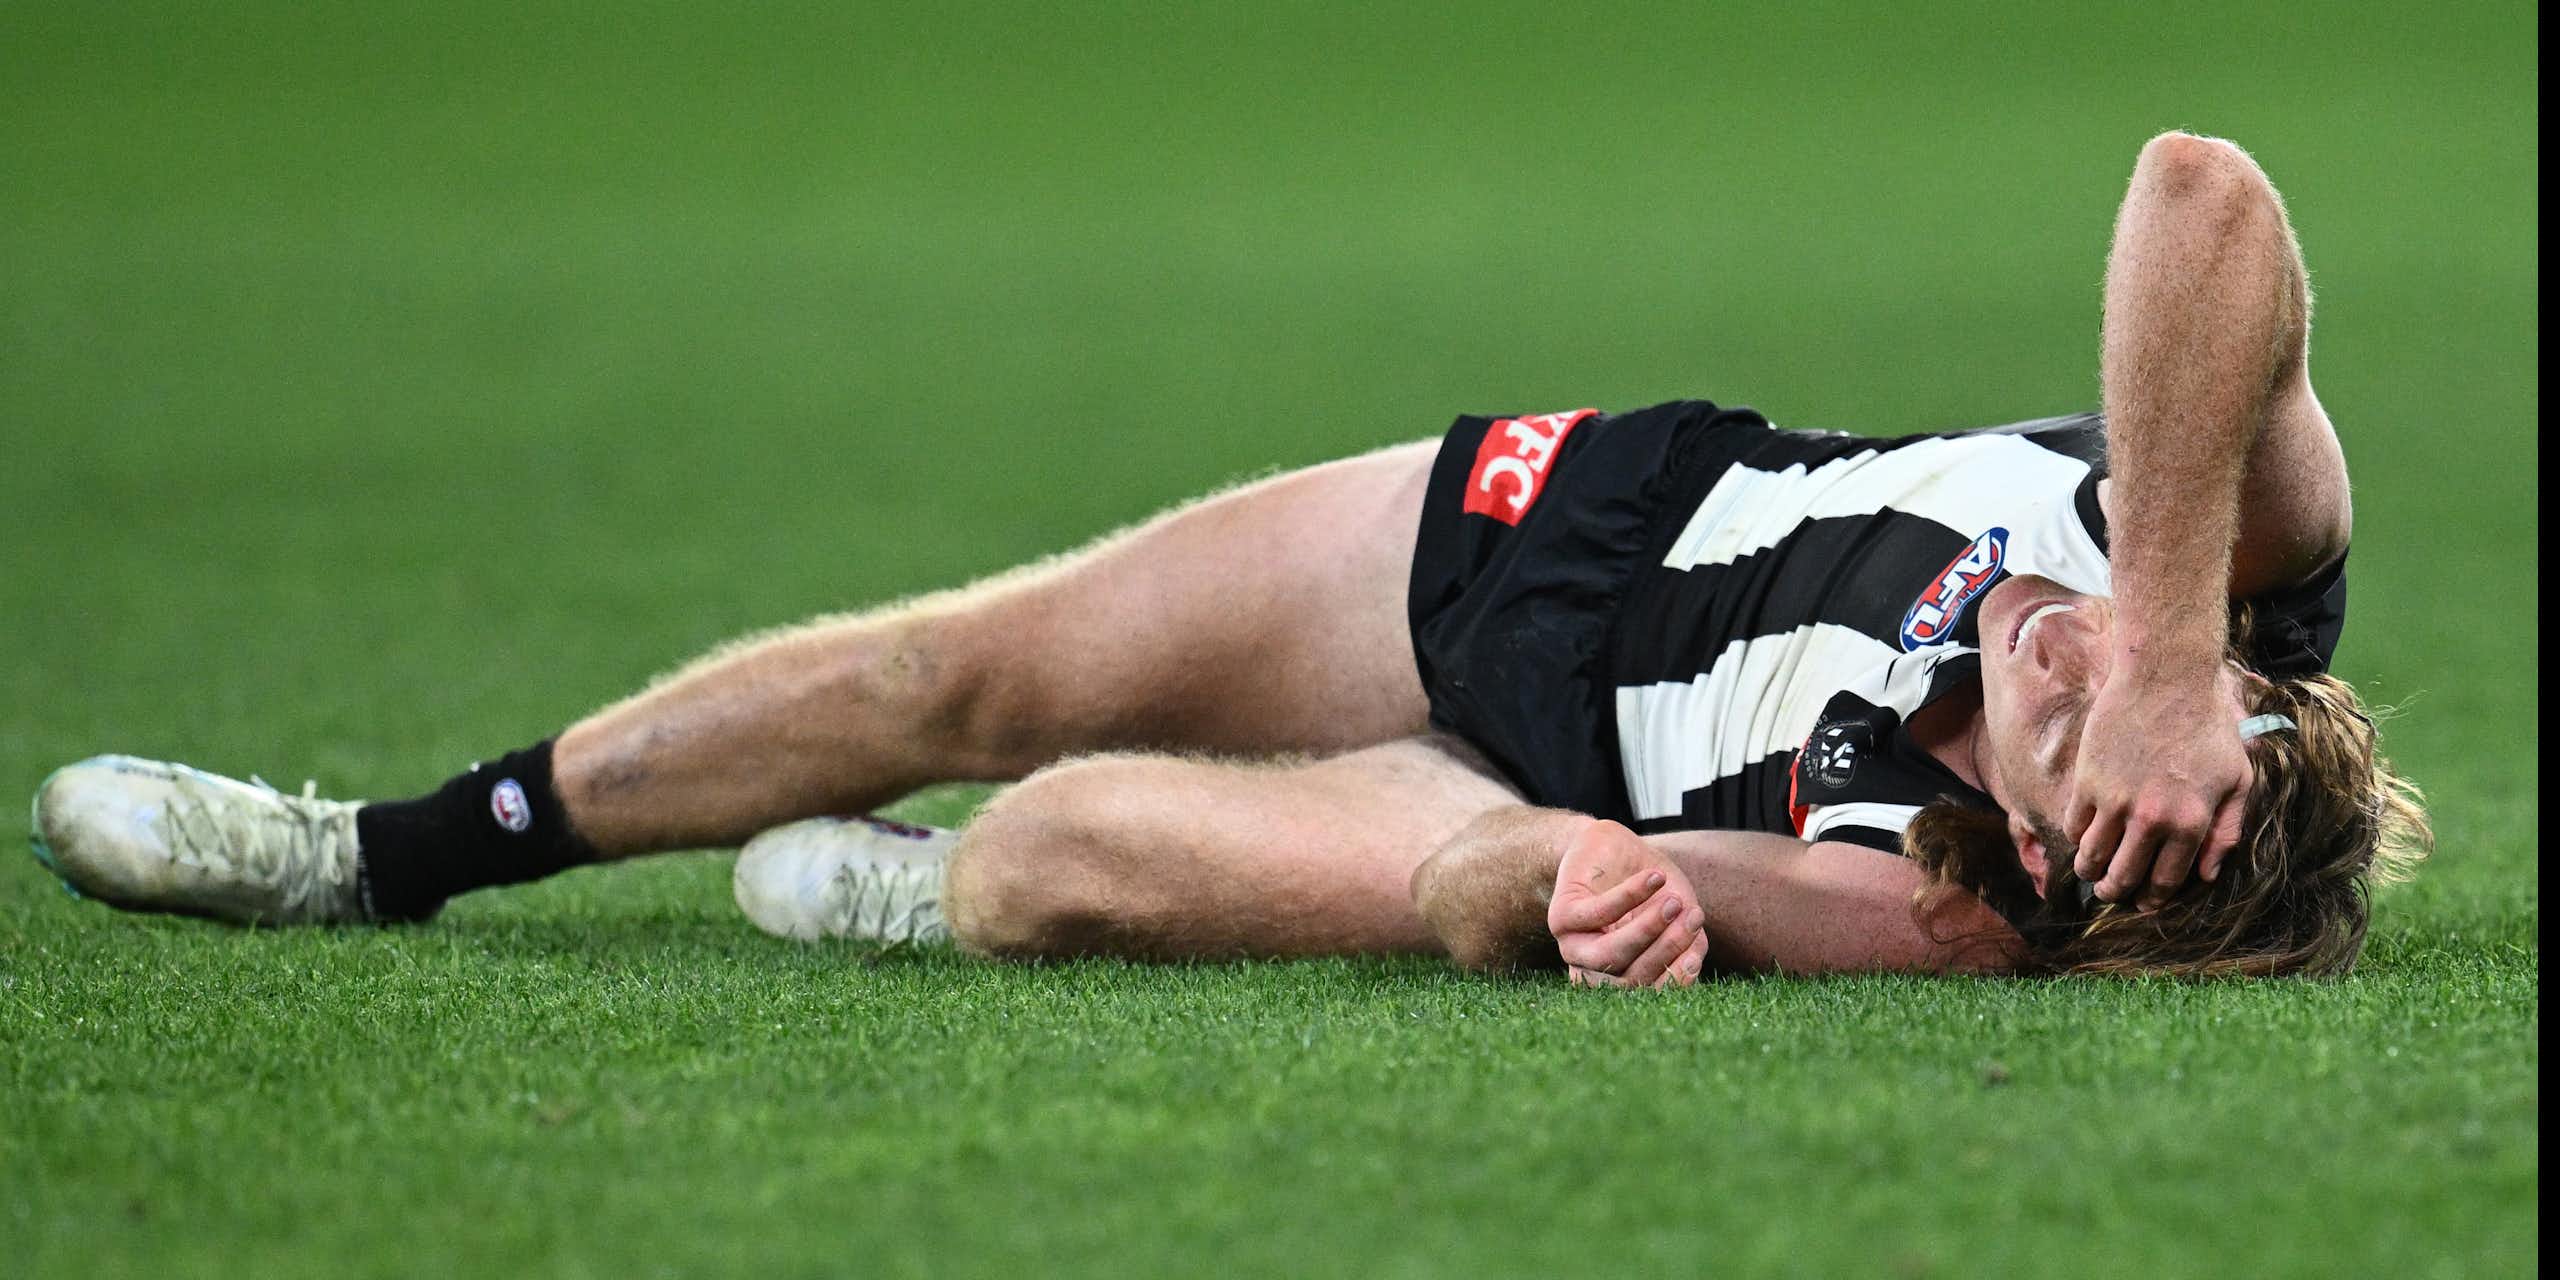 Collingwood player Nathan Murphy lays injured during a game